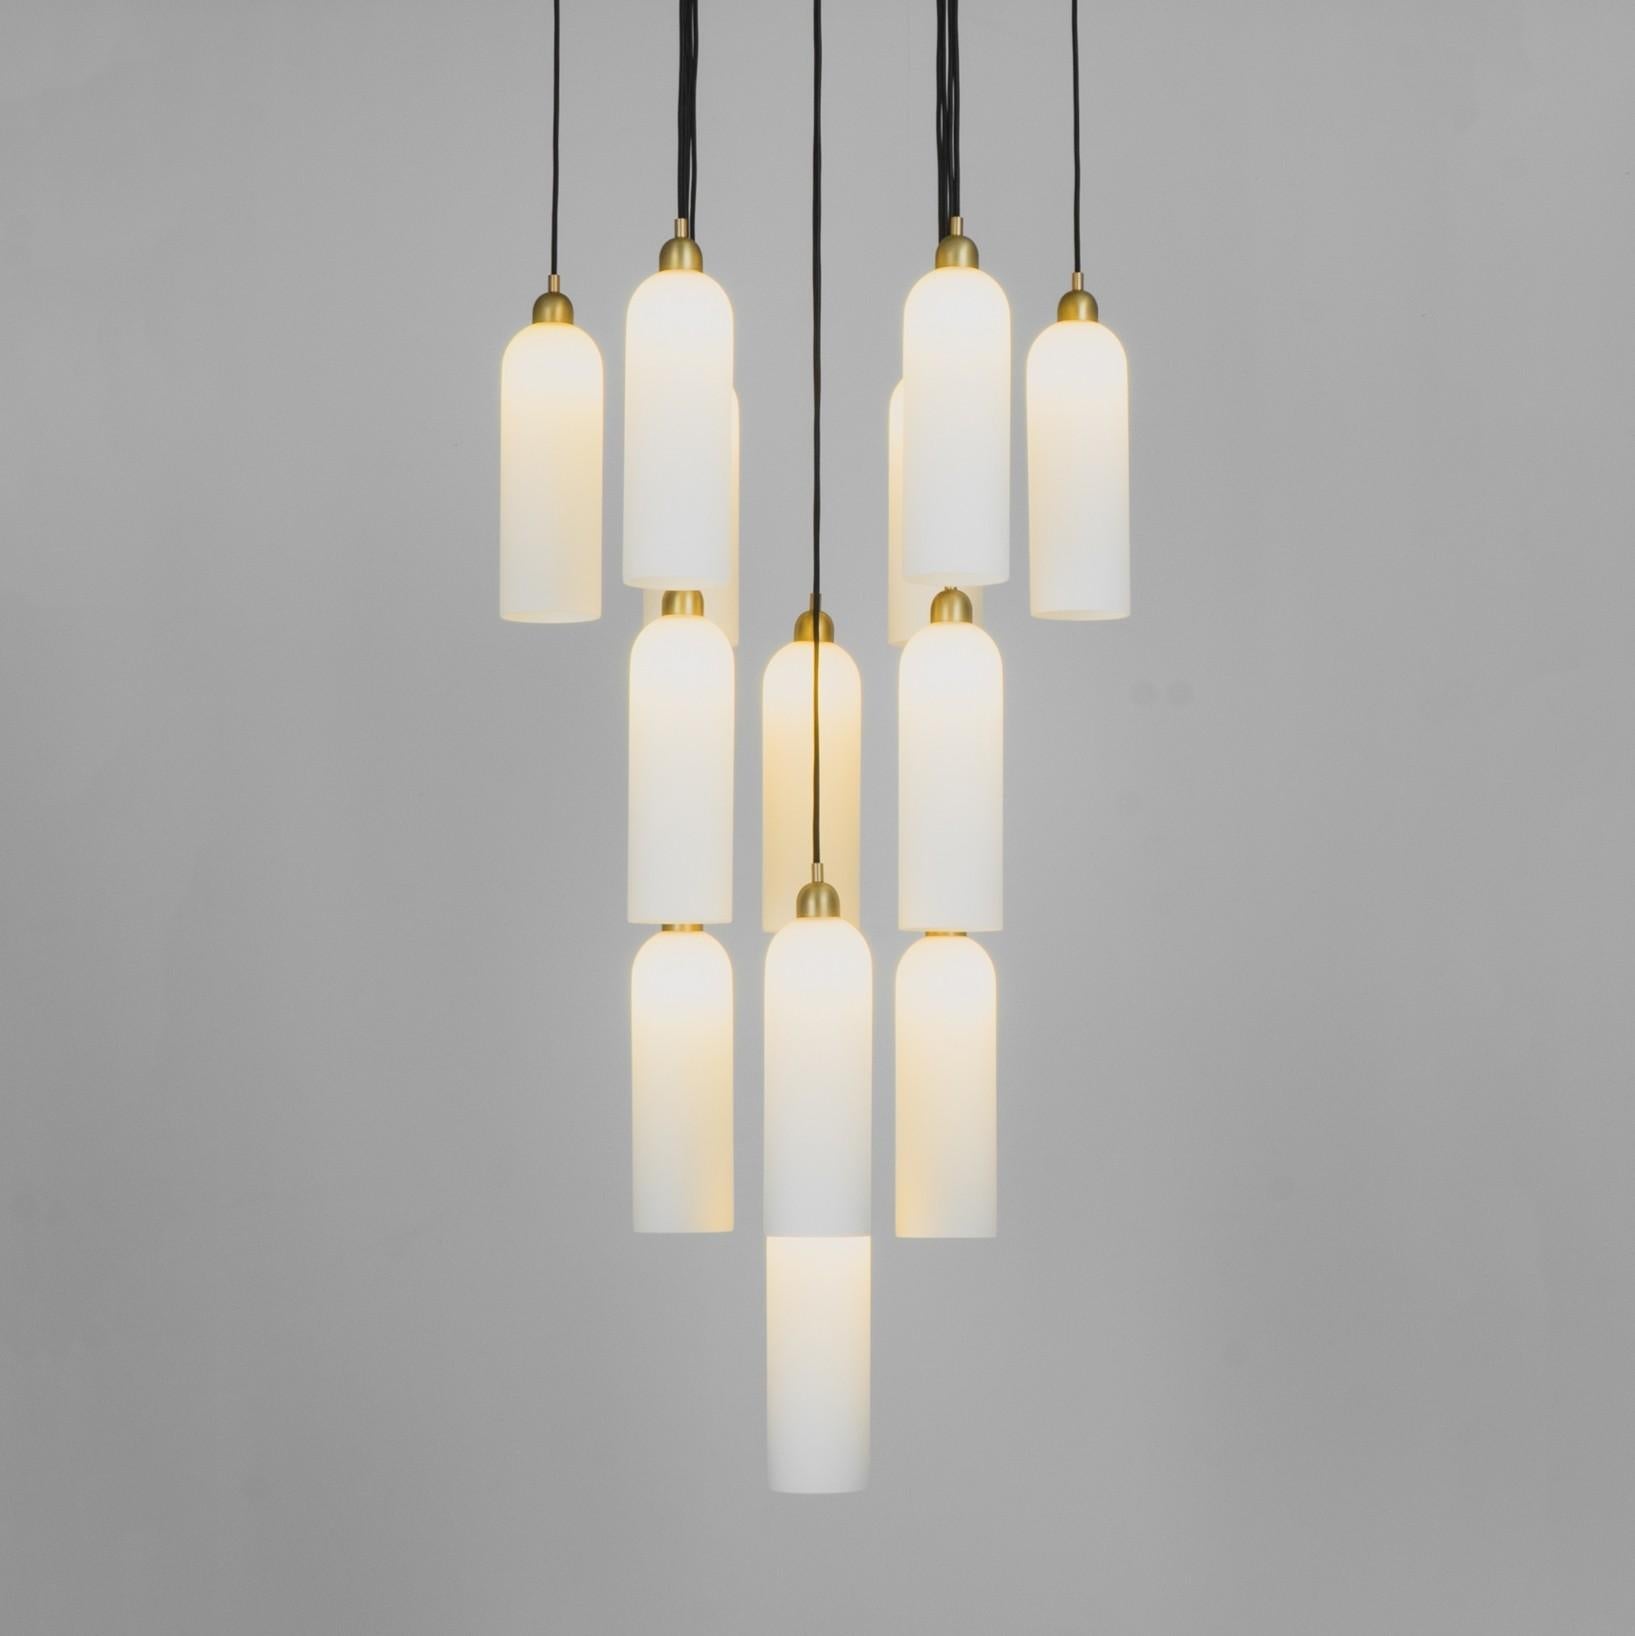 Brass opal contemporary chandelier 13 by Schwung
Dimensions: D 56 x W 63.1 x H 330 cm 
Base: diameter 63 cm
Materials: solid brass, Triplex opal glass. 
Finish: natural brass. 
Available in finishes: polished nickel or black gunmetal.
All our